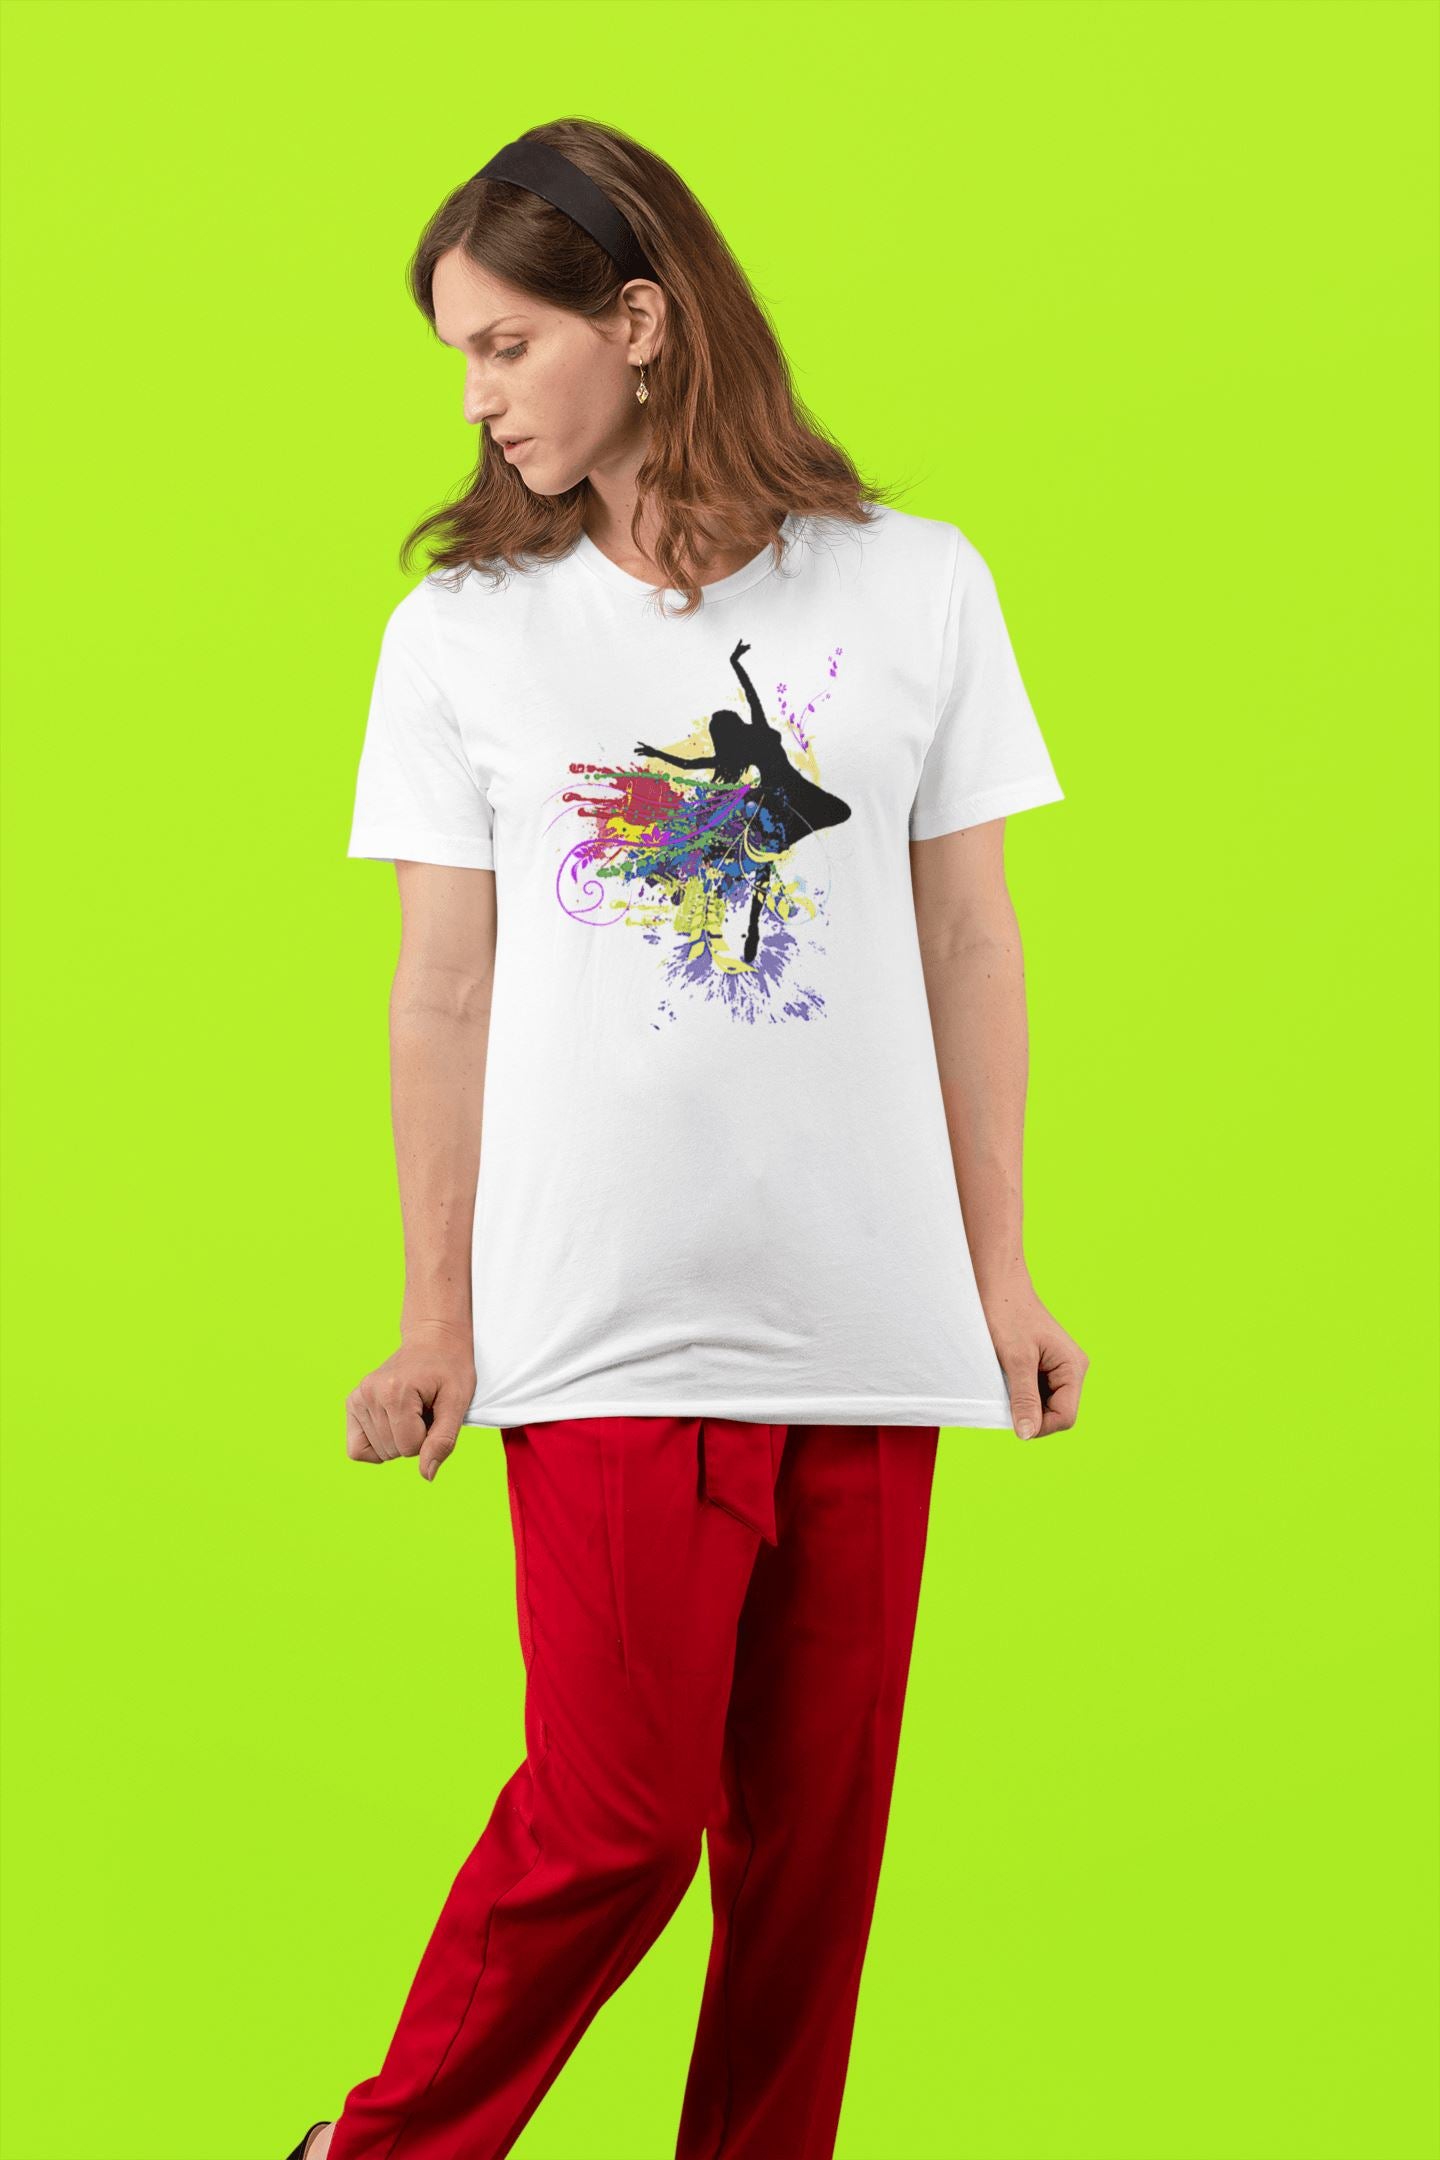 Dance is Life Expressive T Shirt for Women | Premium Design | Catch My Drift India - Catch My Drift India  clothing, dance, dancing, female, general, gym, made in india, shirt, t shirt, trend